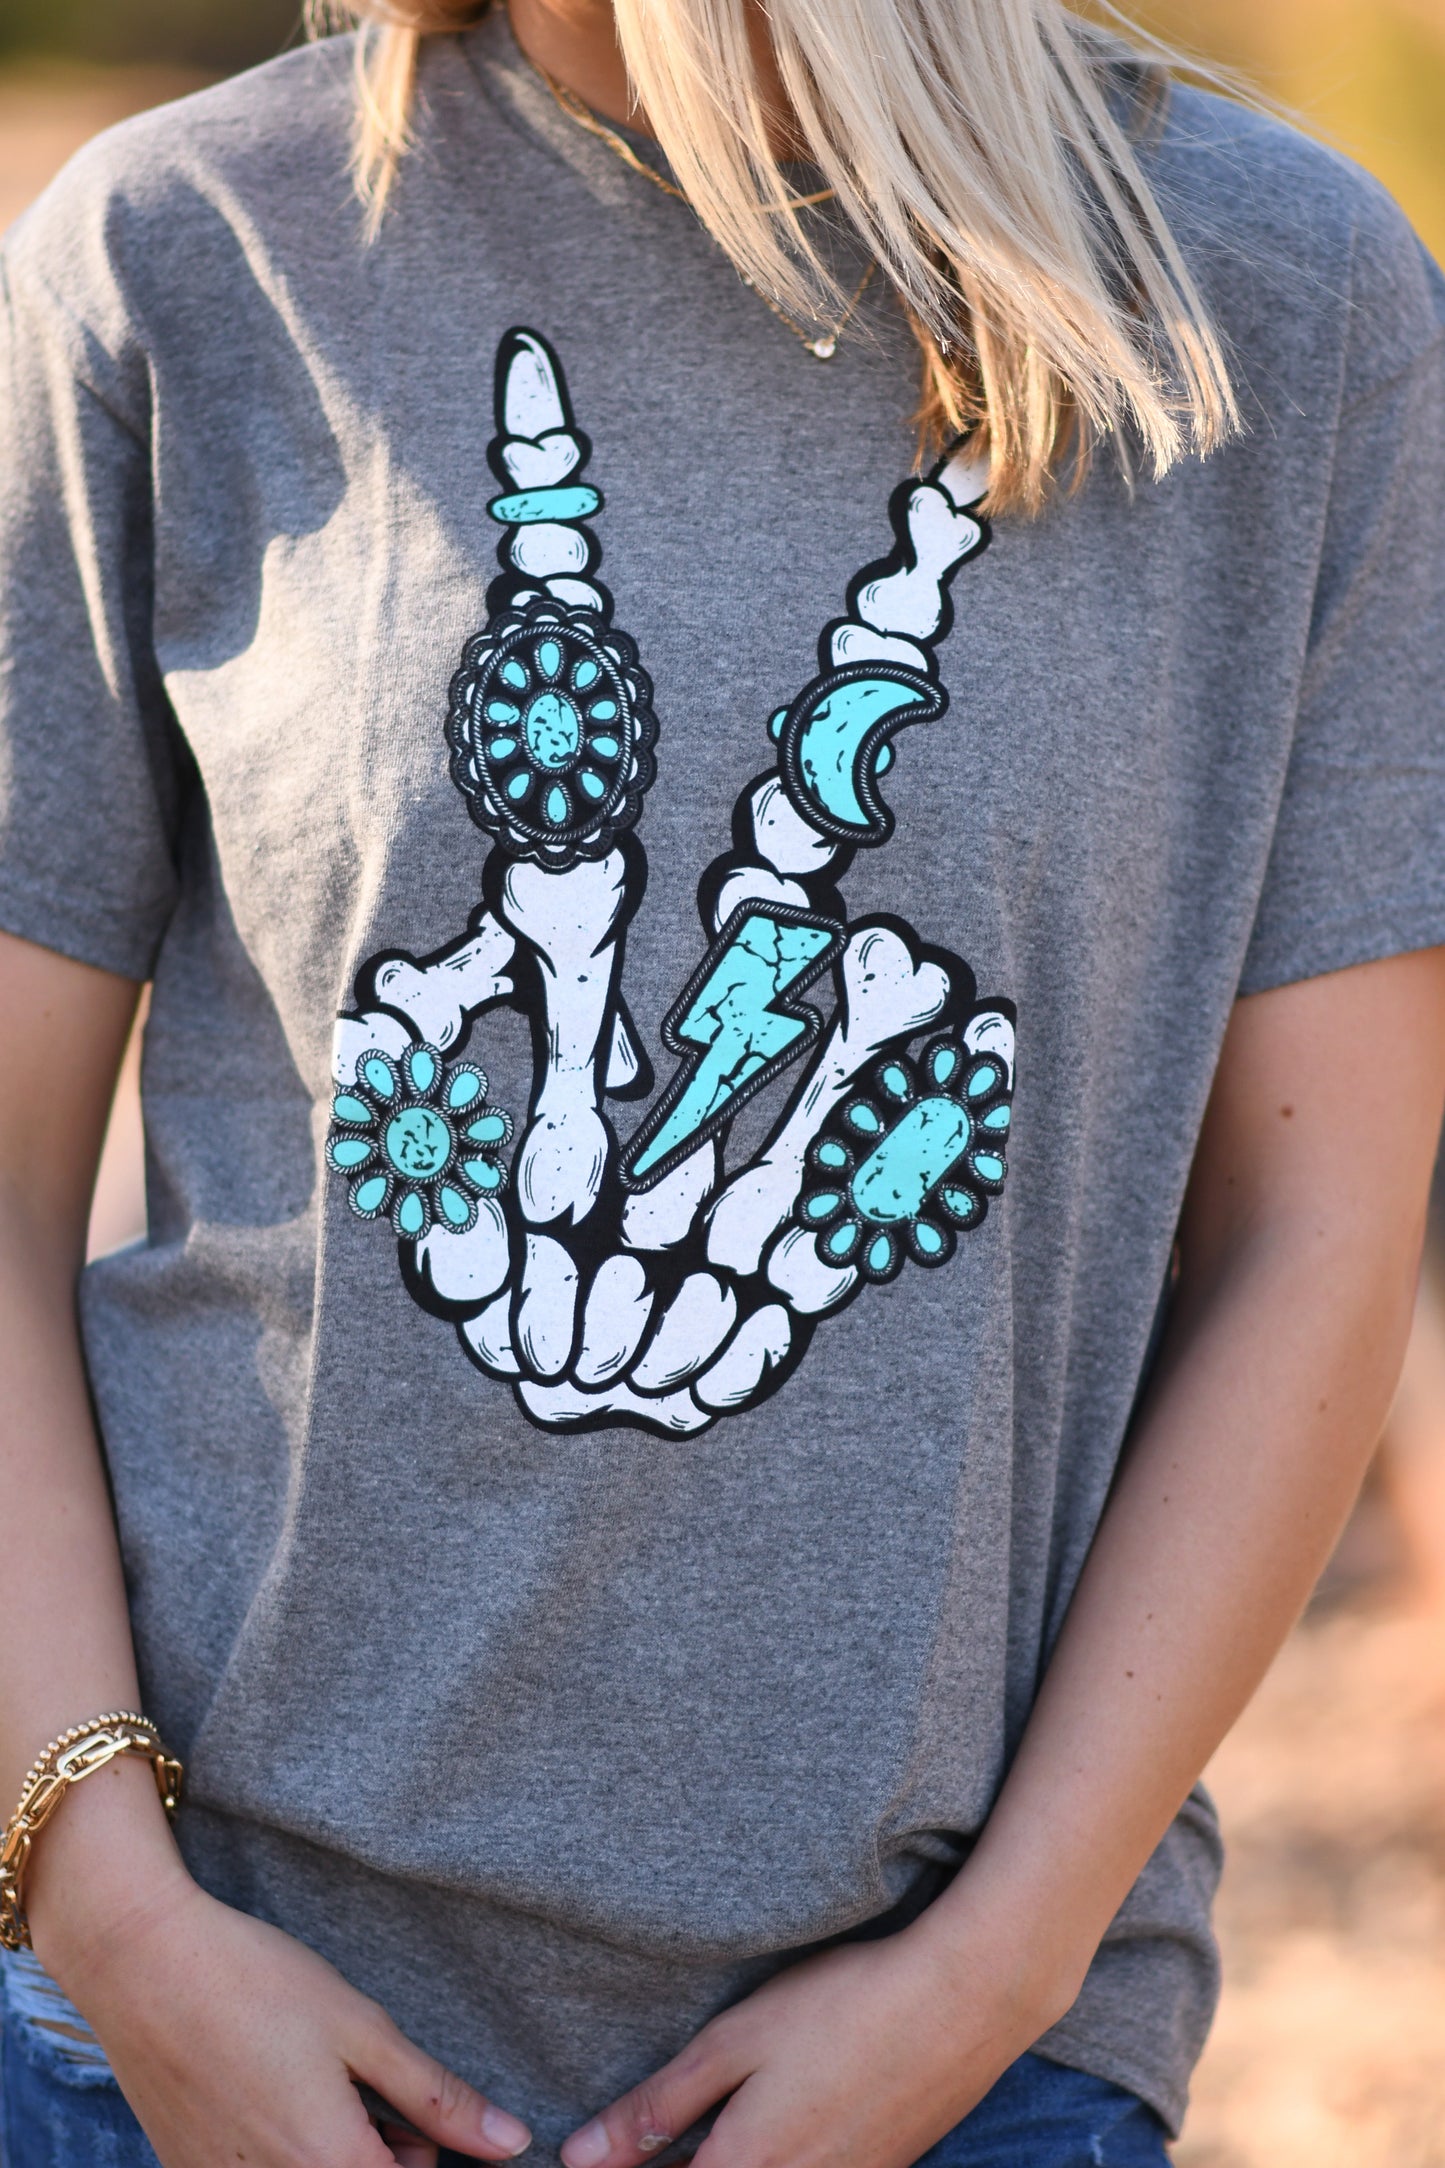 Western Skelly Peace Hand Graphic Tee